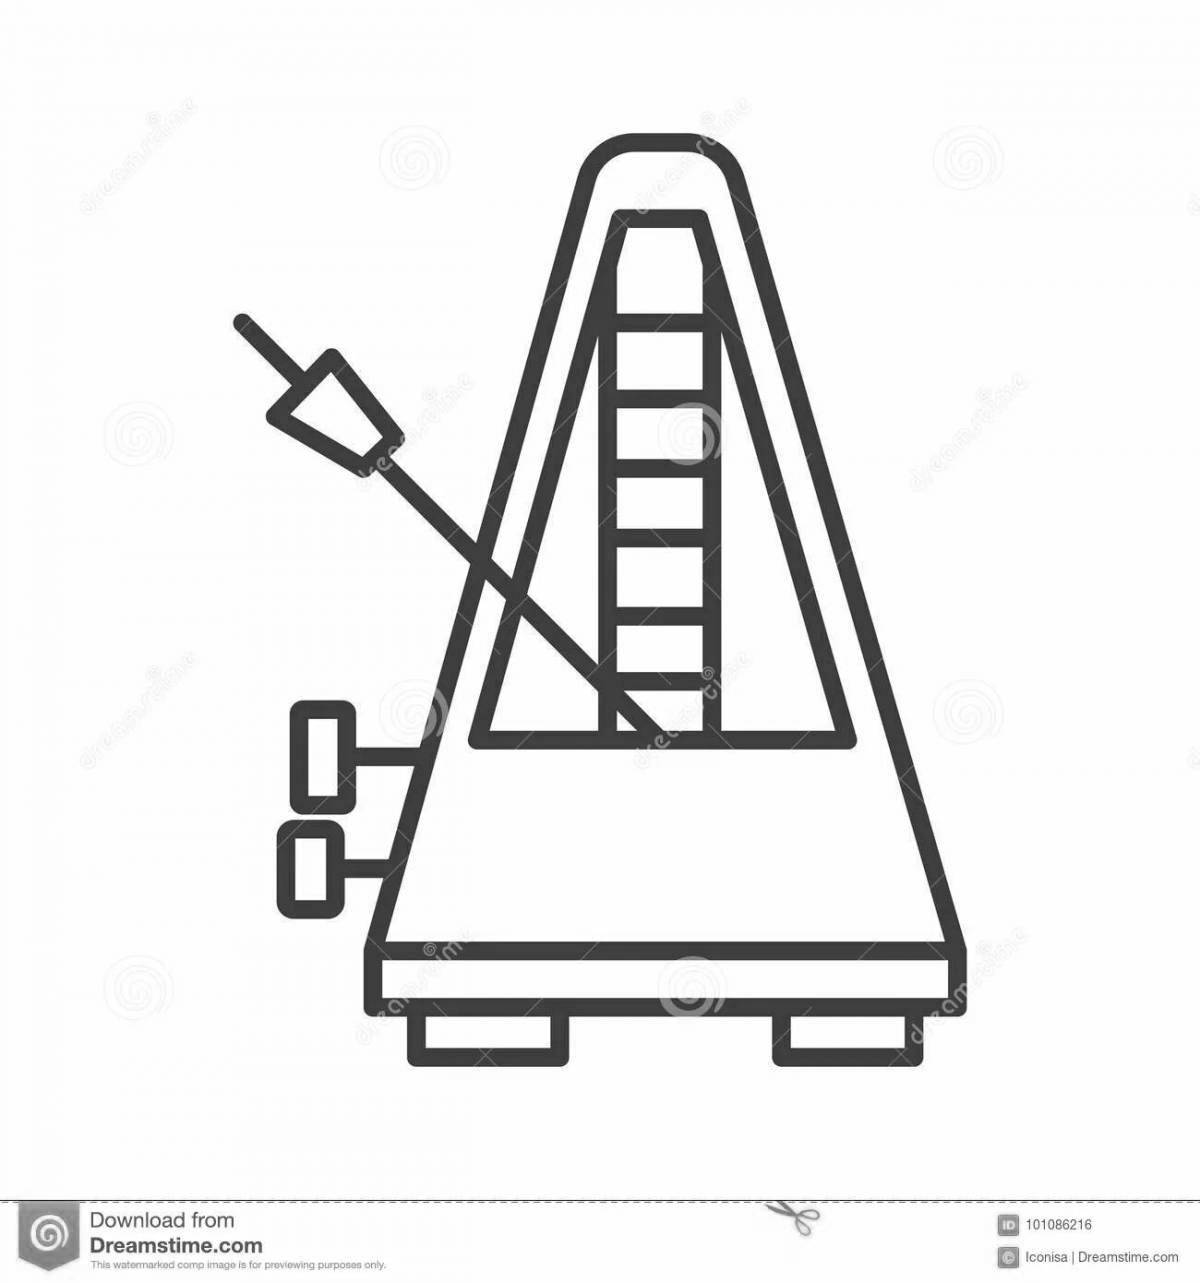 Coloring page metronome exploding with color